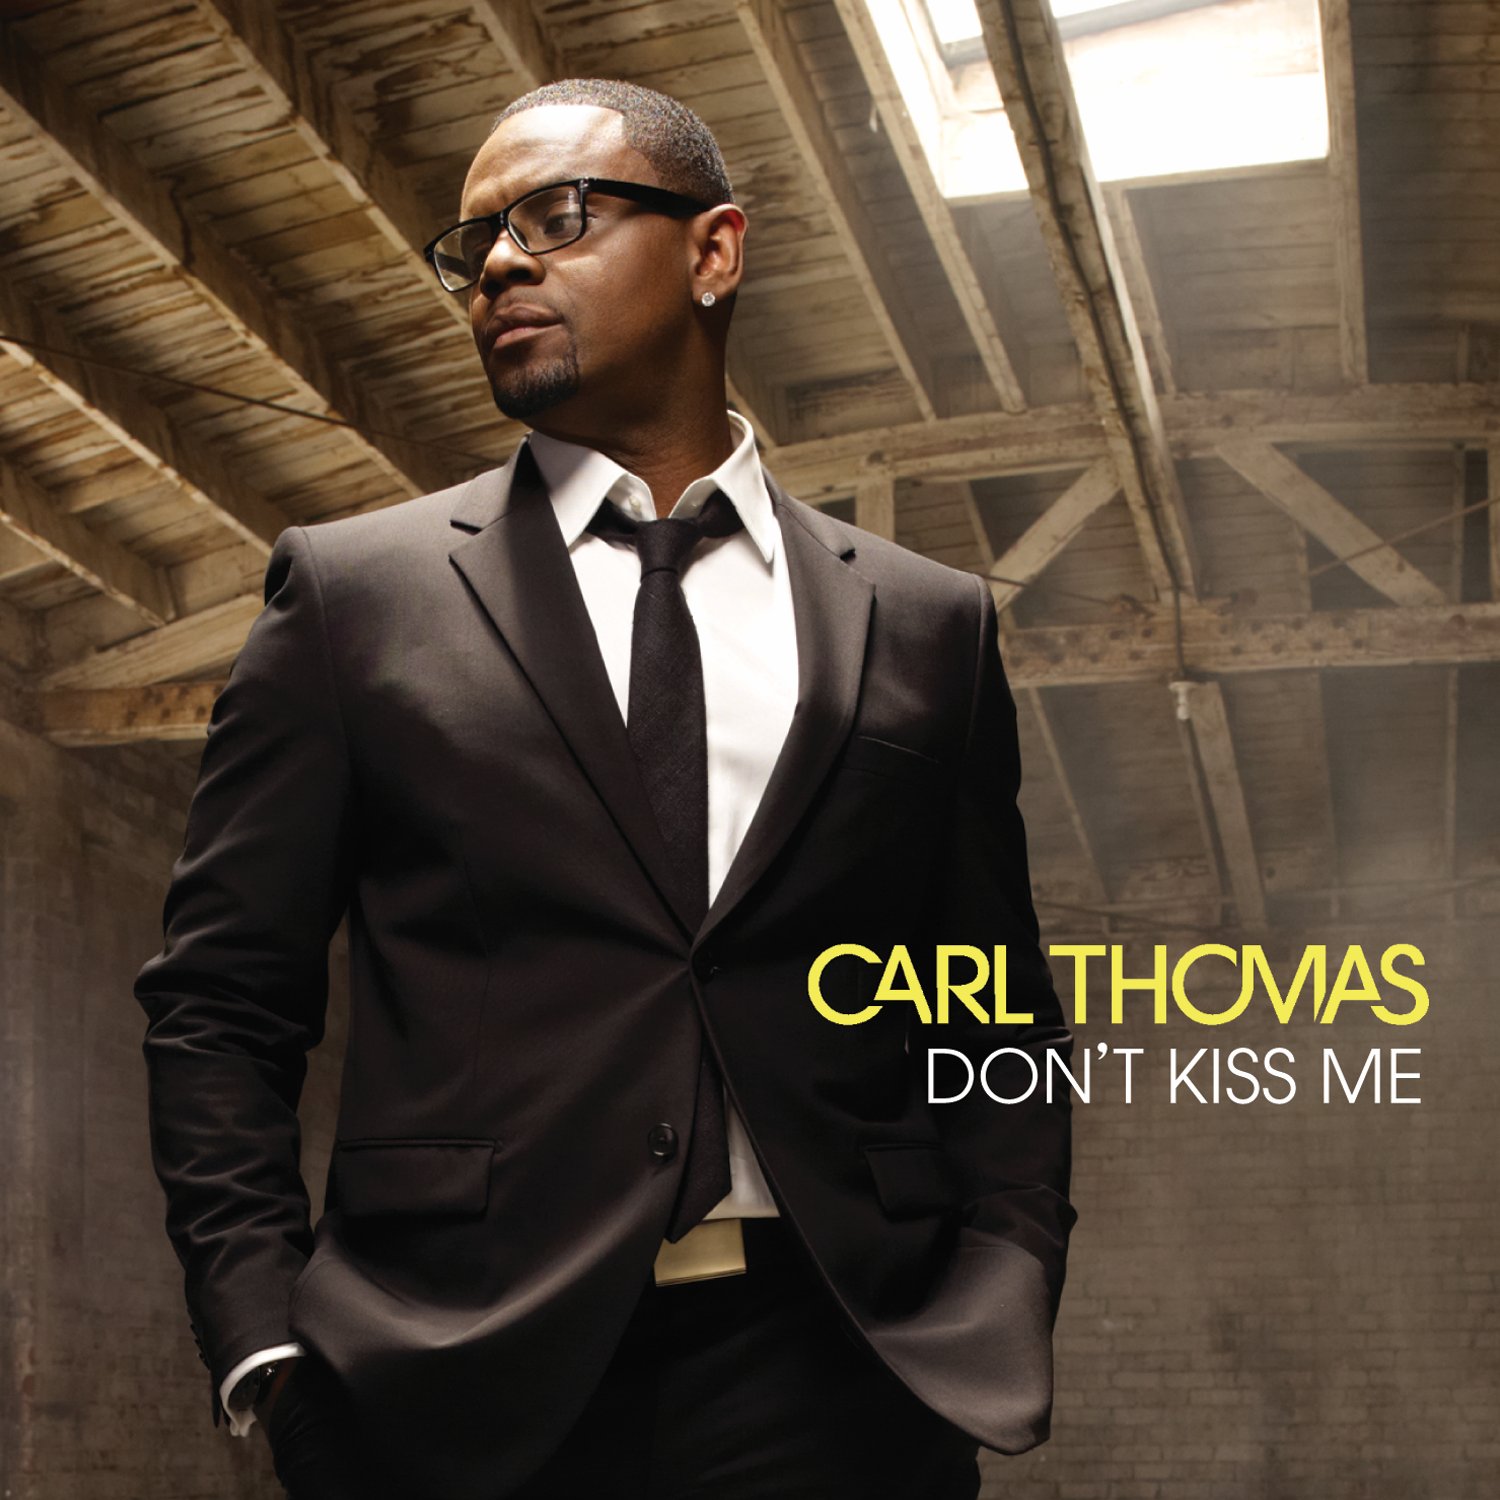 Carl Thomas "Don't Kiss Me" Featuring Snoop Dogg (Video)